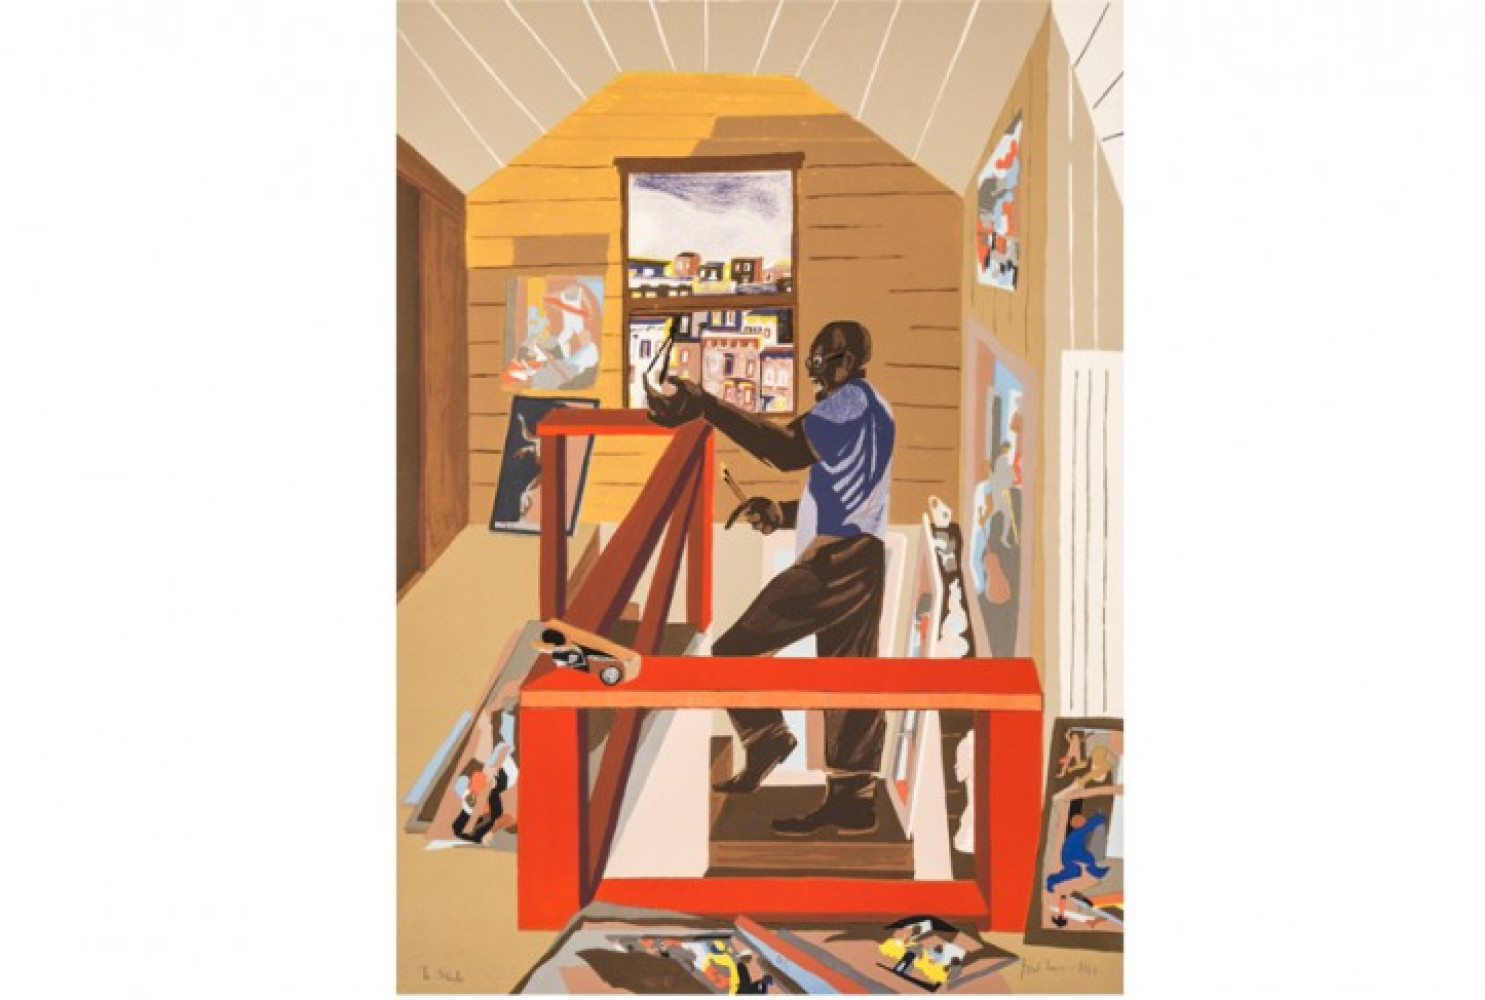 The Studio, 1996, by Jacob Lawrence (1917-2000); lithograph on paper; 30 x 22 1/8 inches; Courtesy of the Jacob and Gwendolyn Knight Lawrence Foundation, Seattle © 2015 Artists Rights Society (ARS), New York